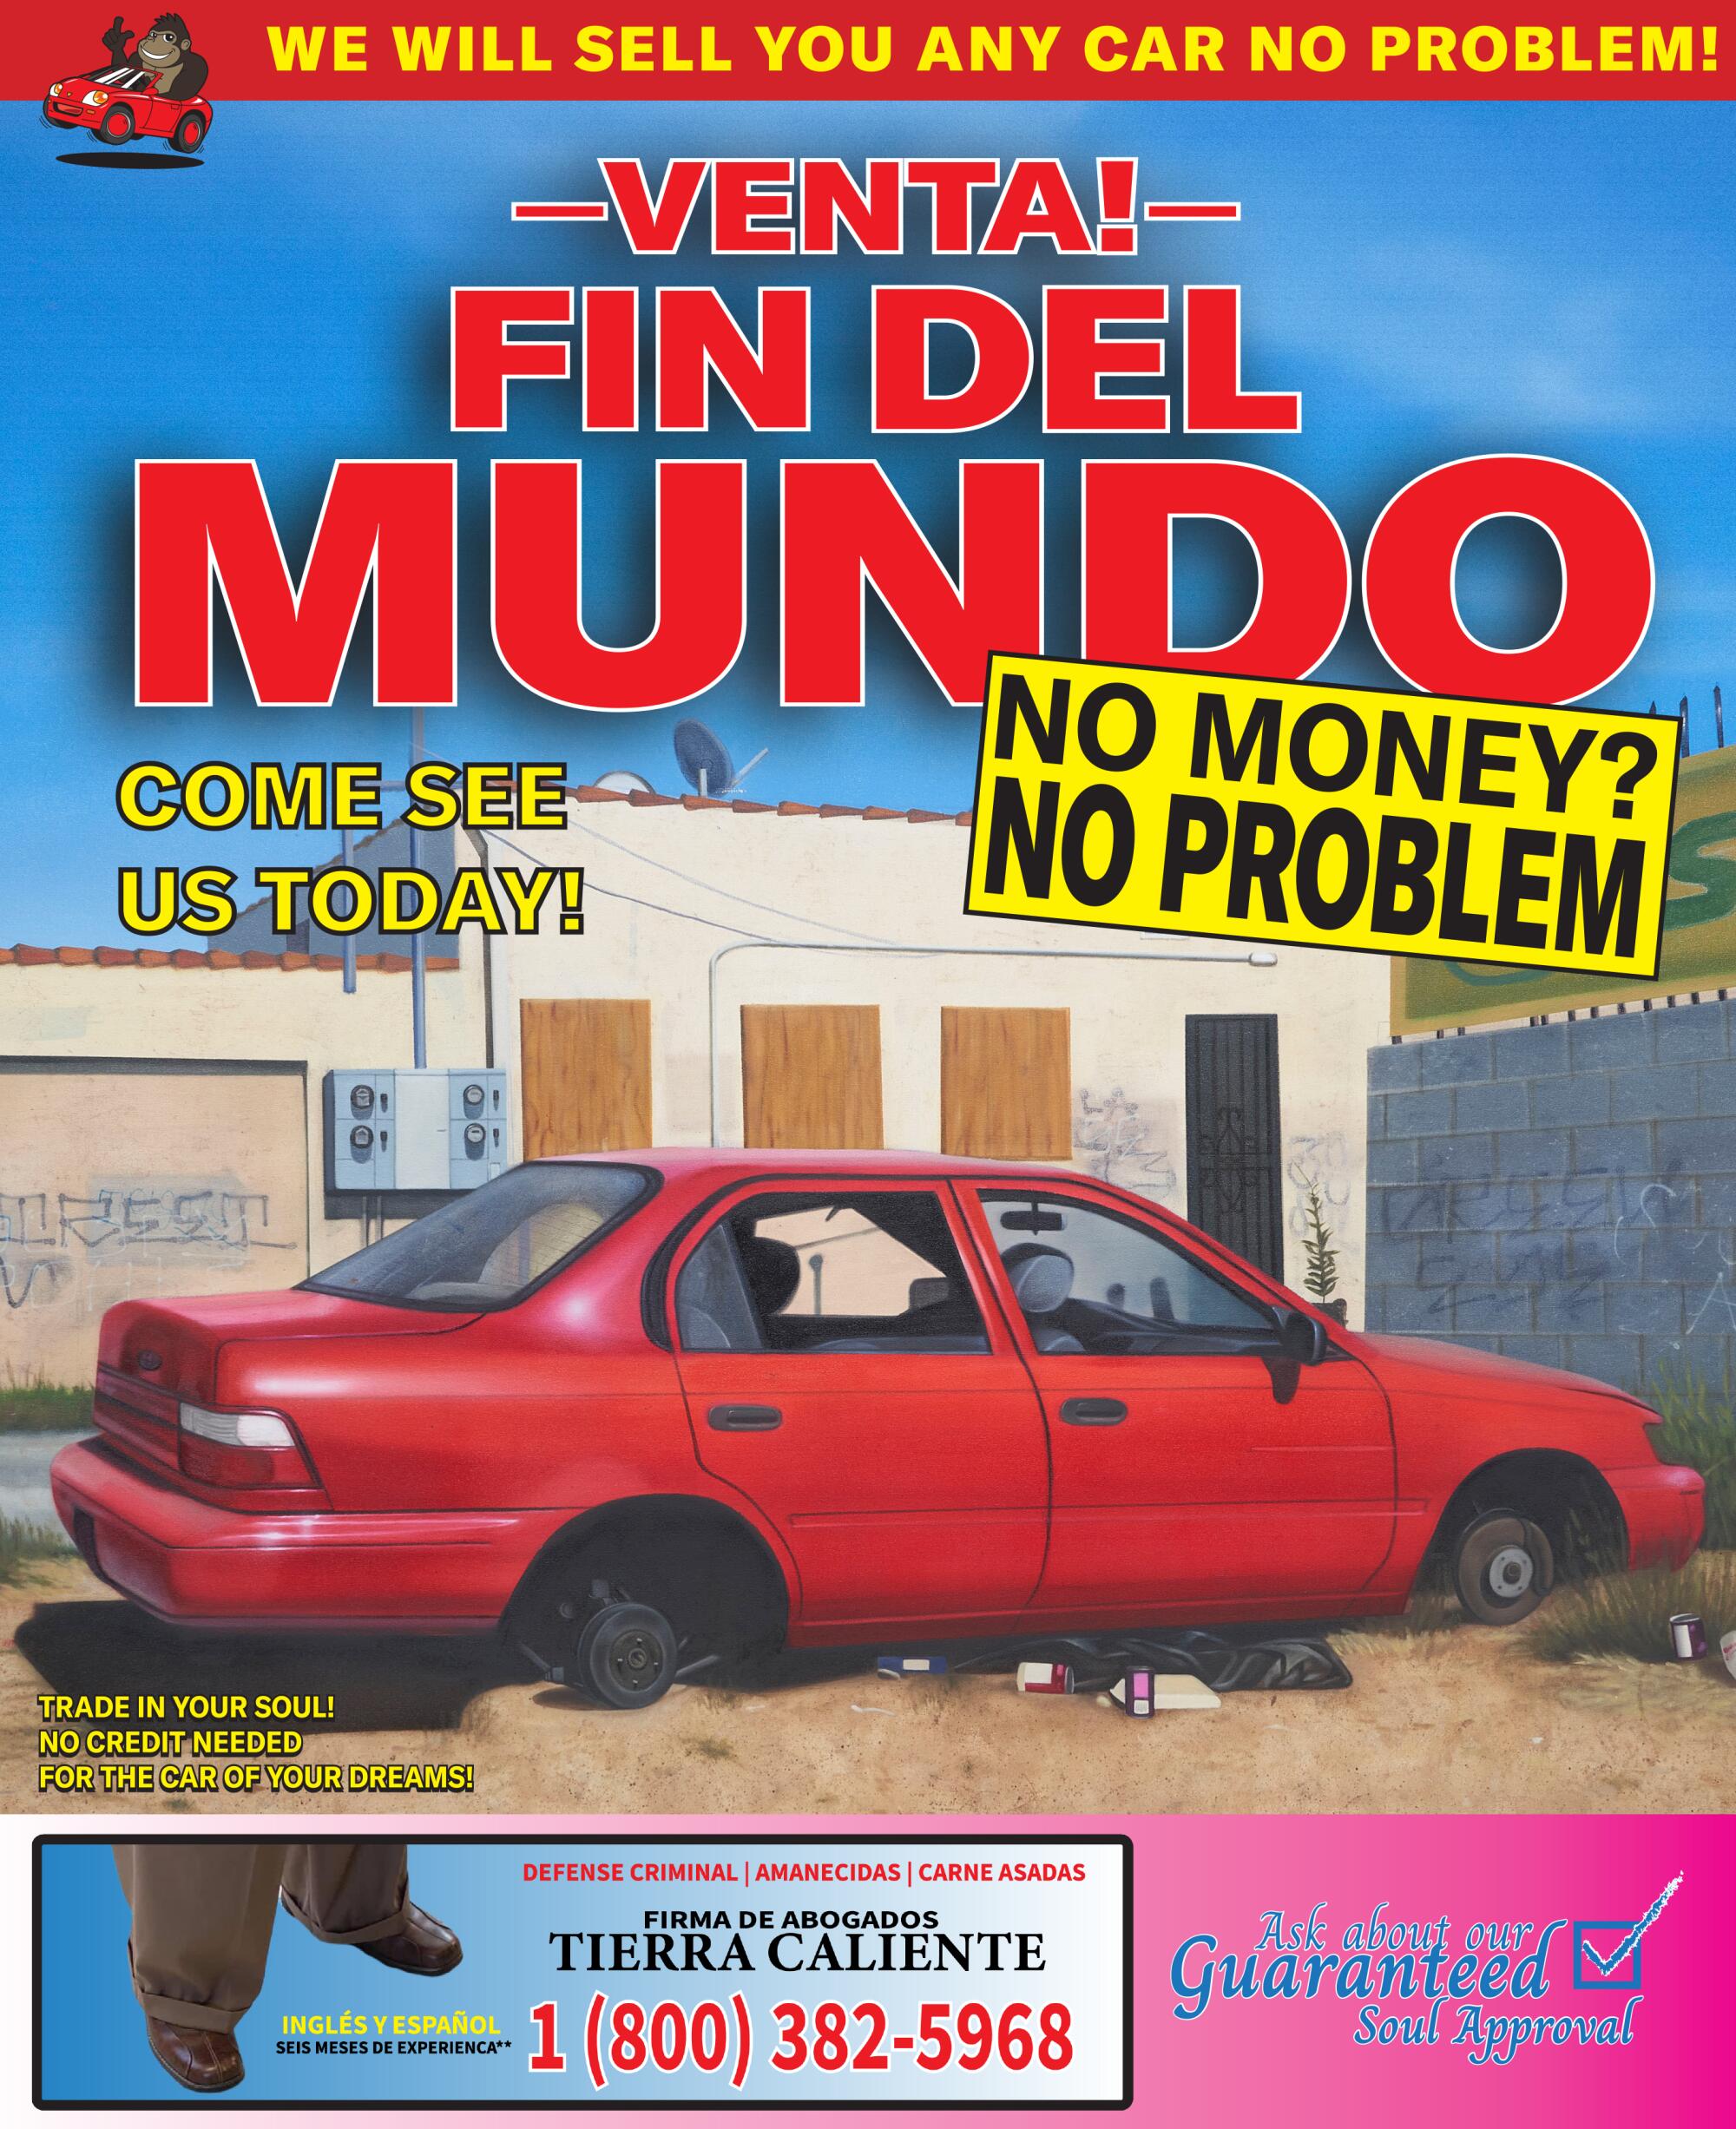 An advertisement for selling "fin del mundo," featuring a red car.